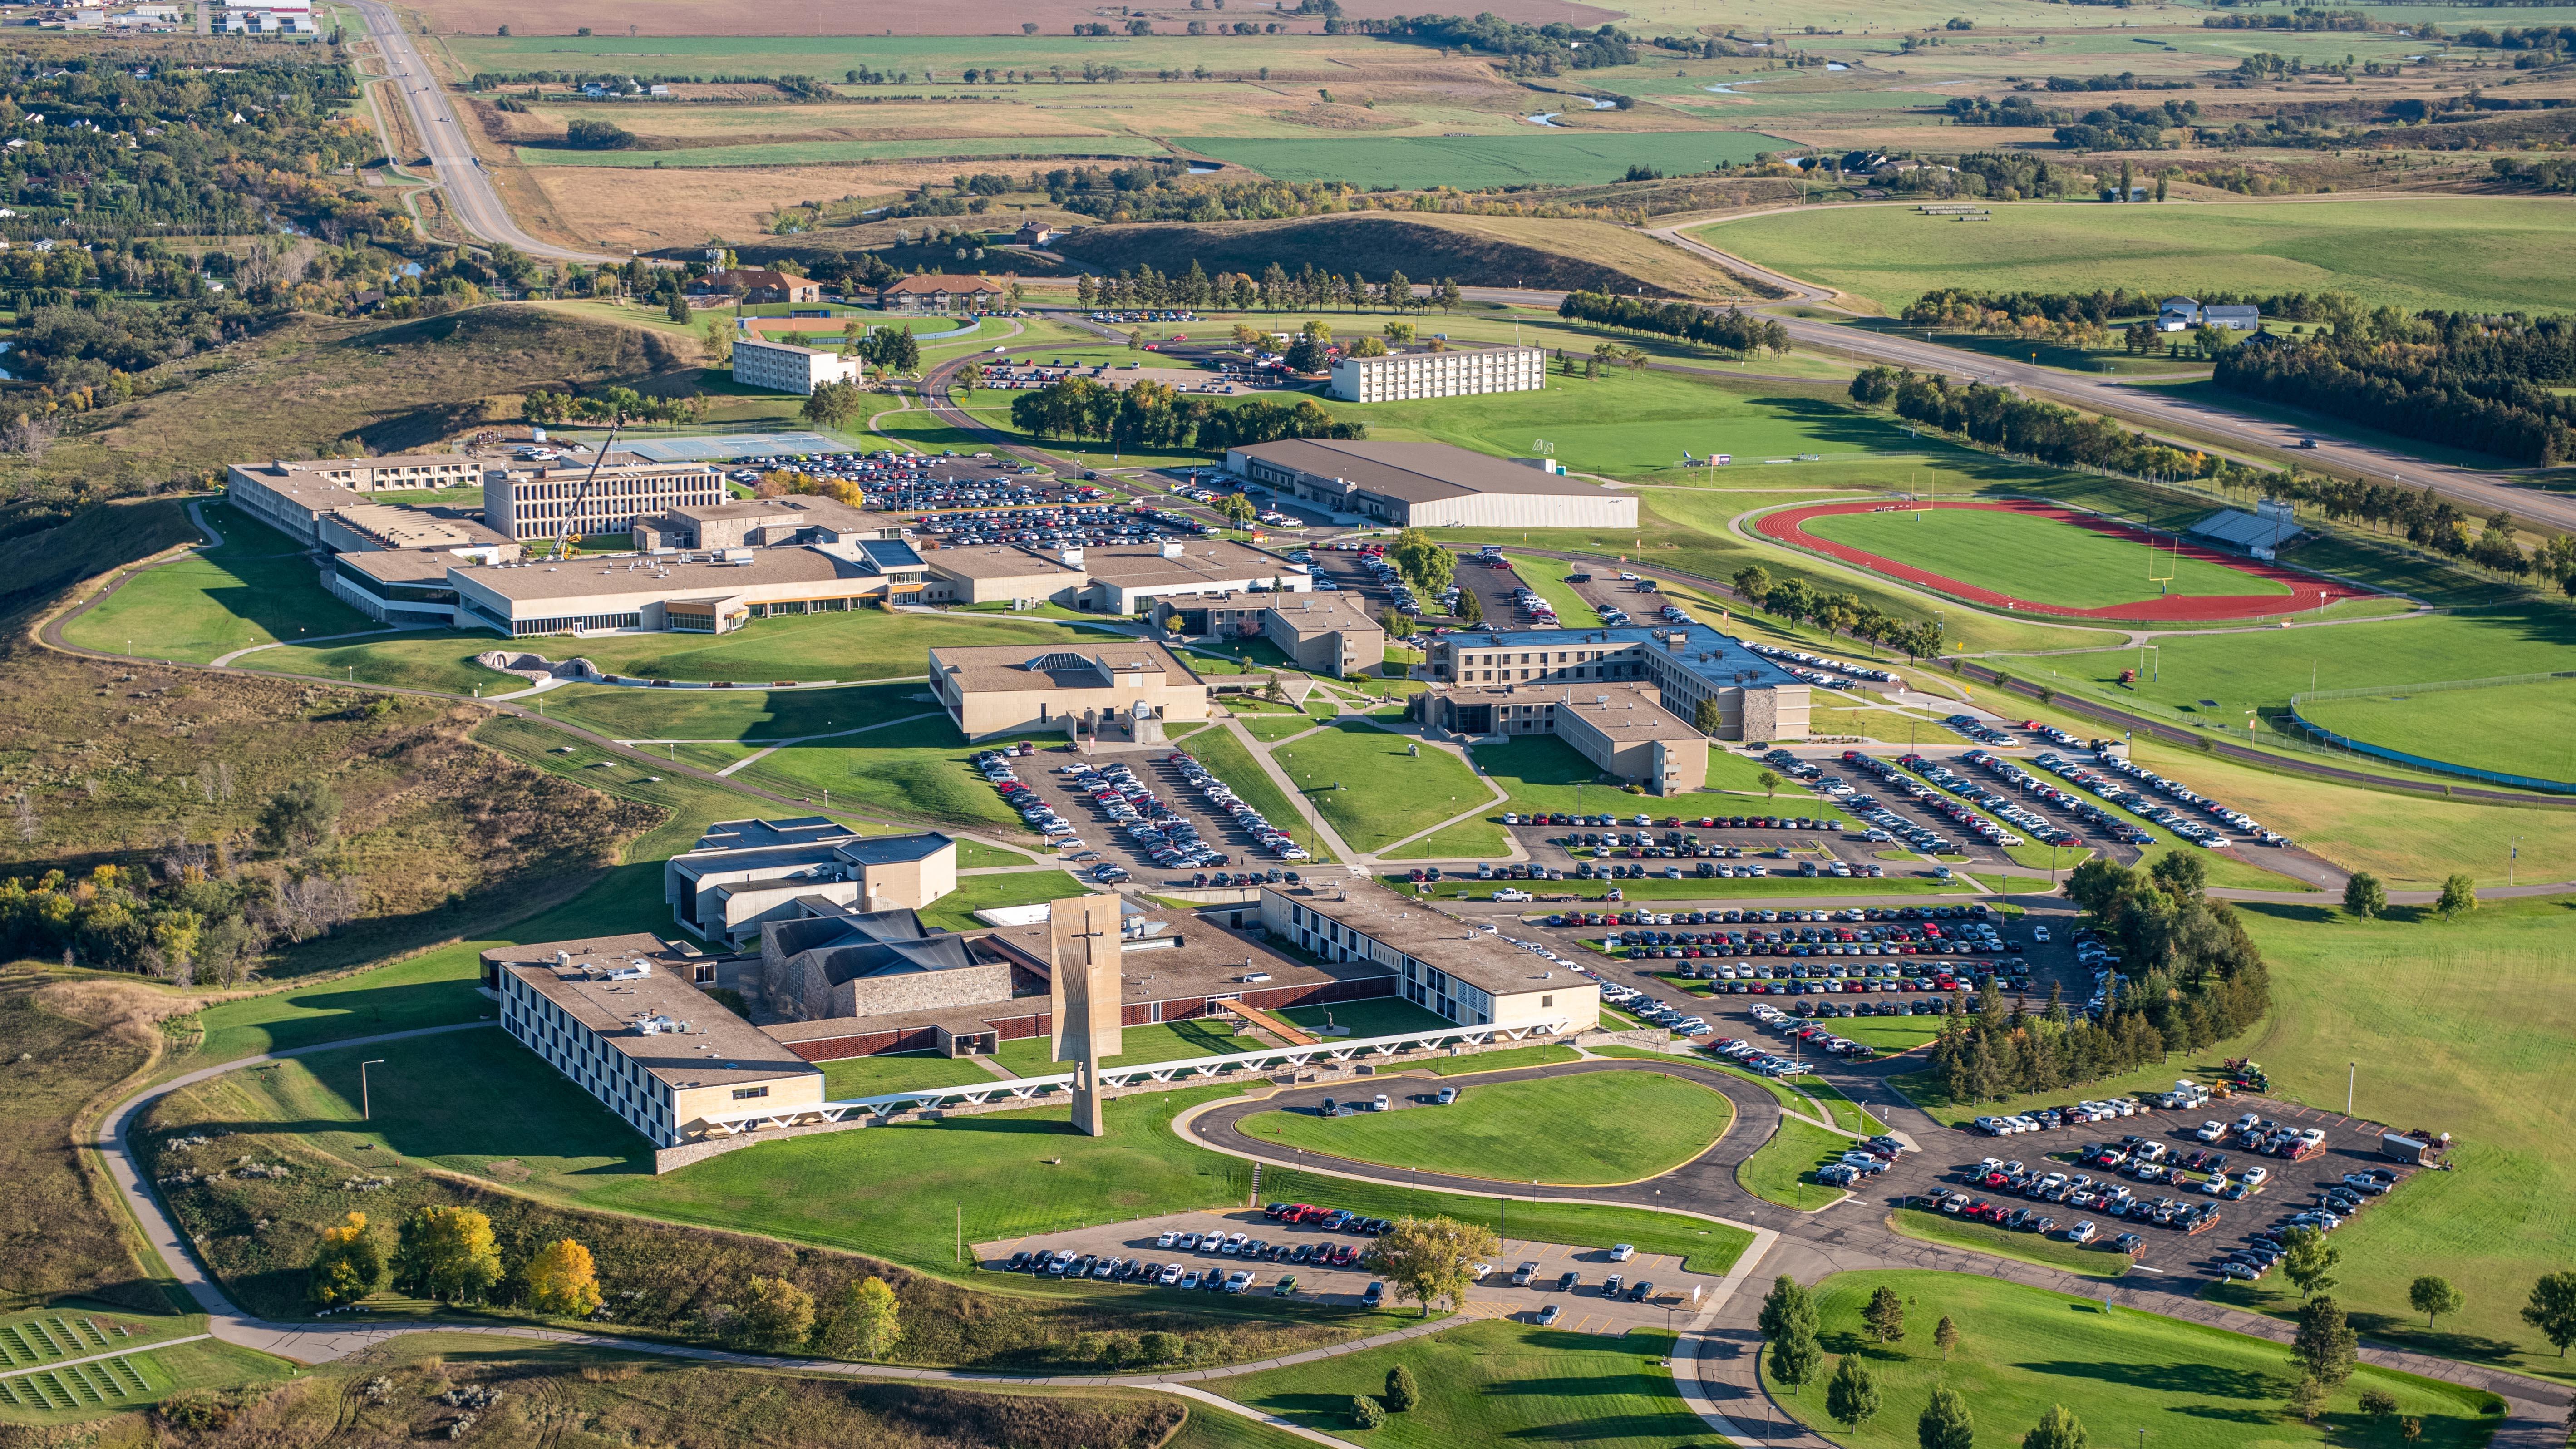 Aerial view of the University of Mary campus.